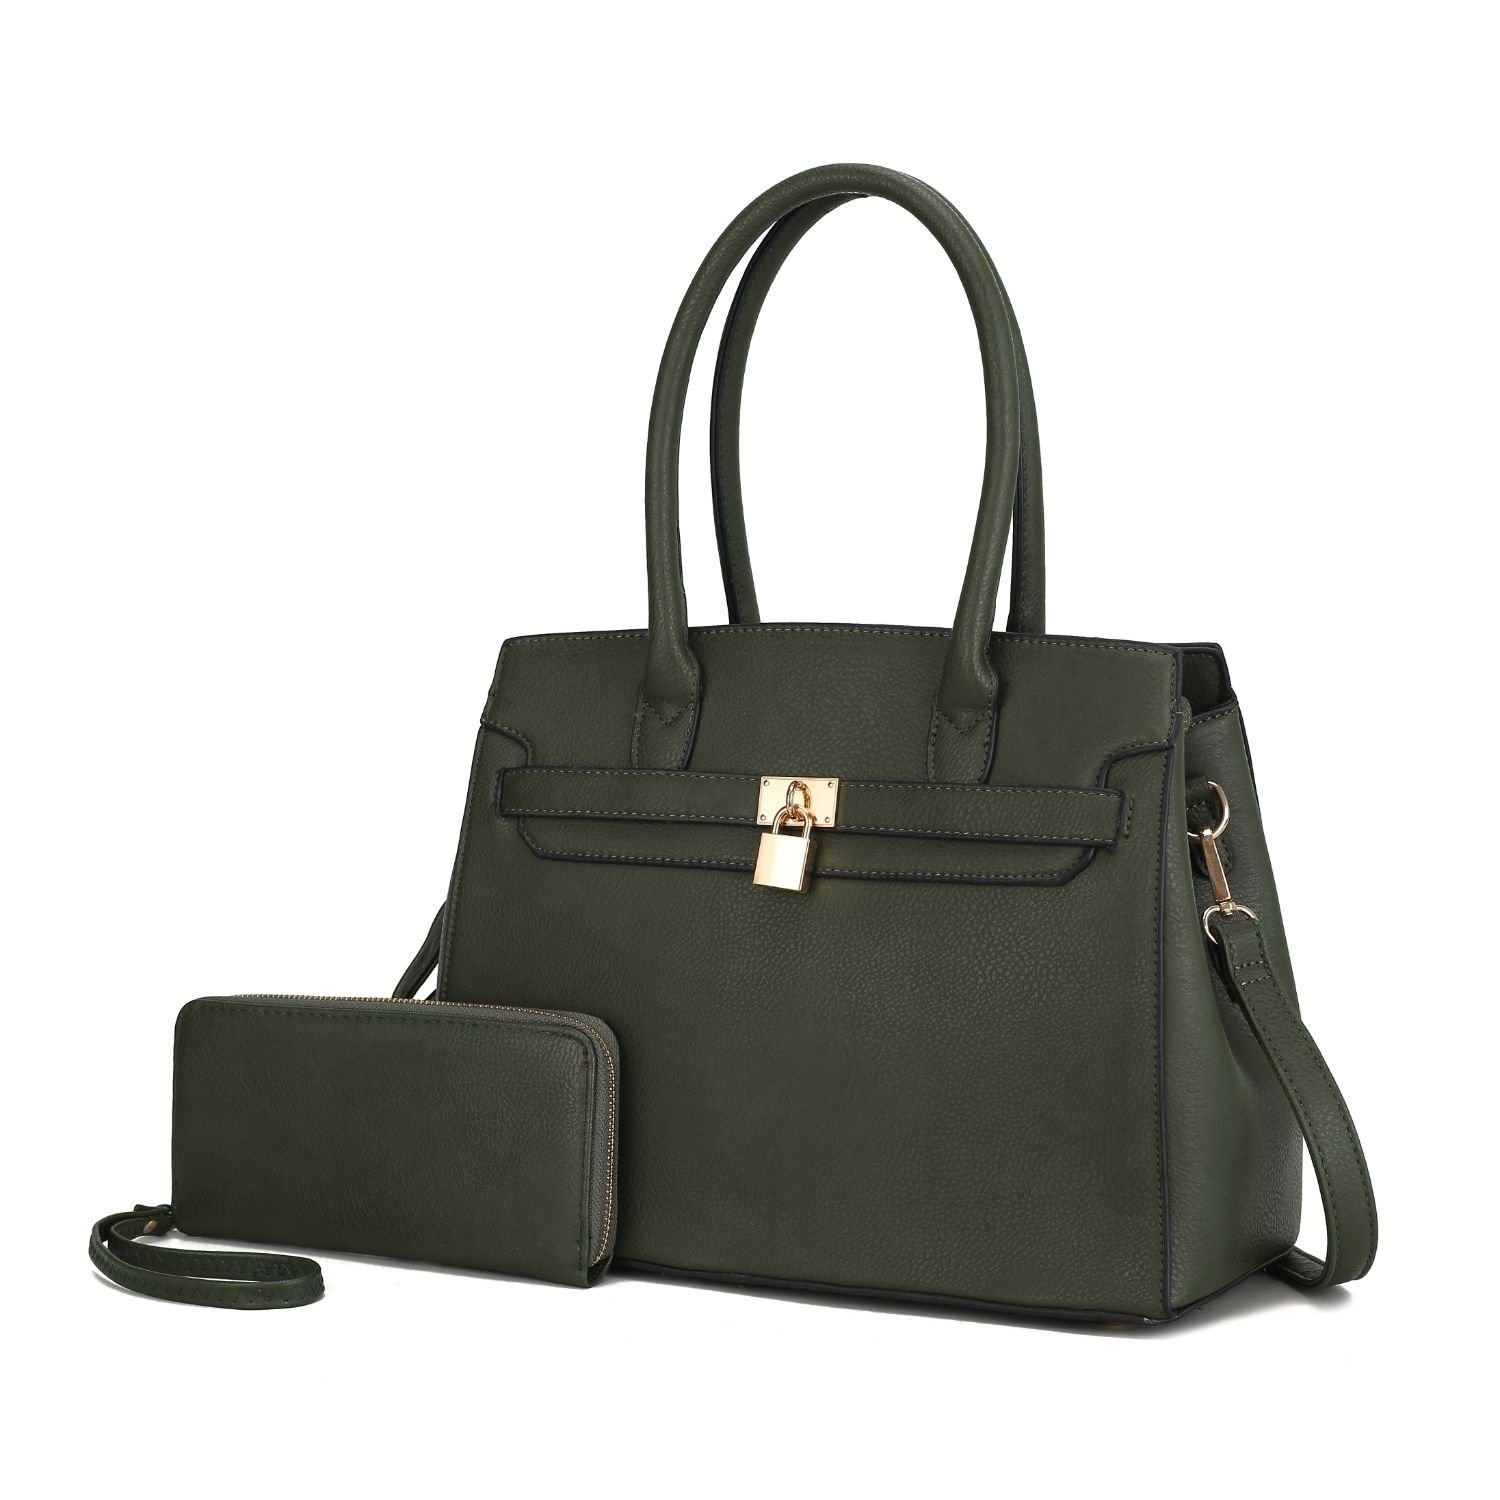 MKF Collection Bruna Satchel Handbag With A Matching Wallet By Mia K -2 Pieces Set - Olive